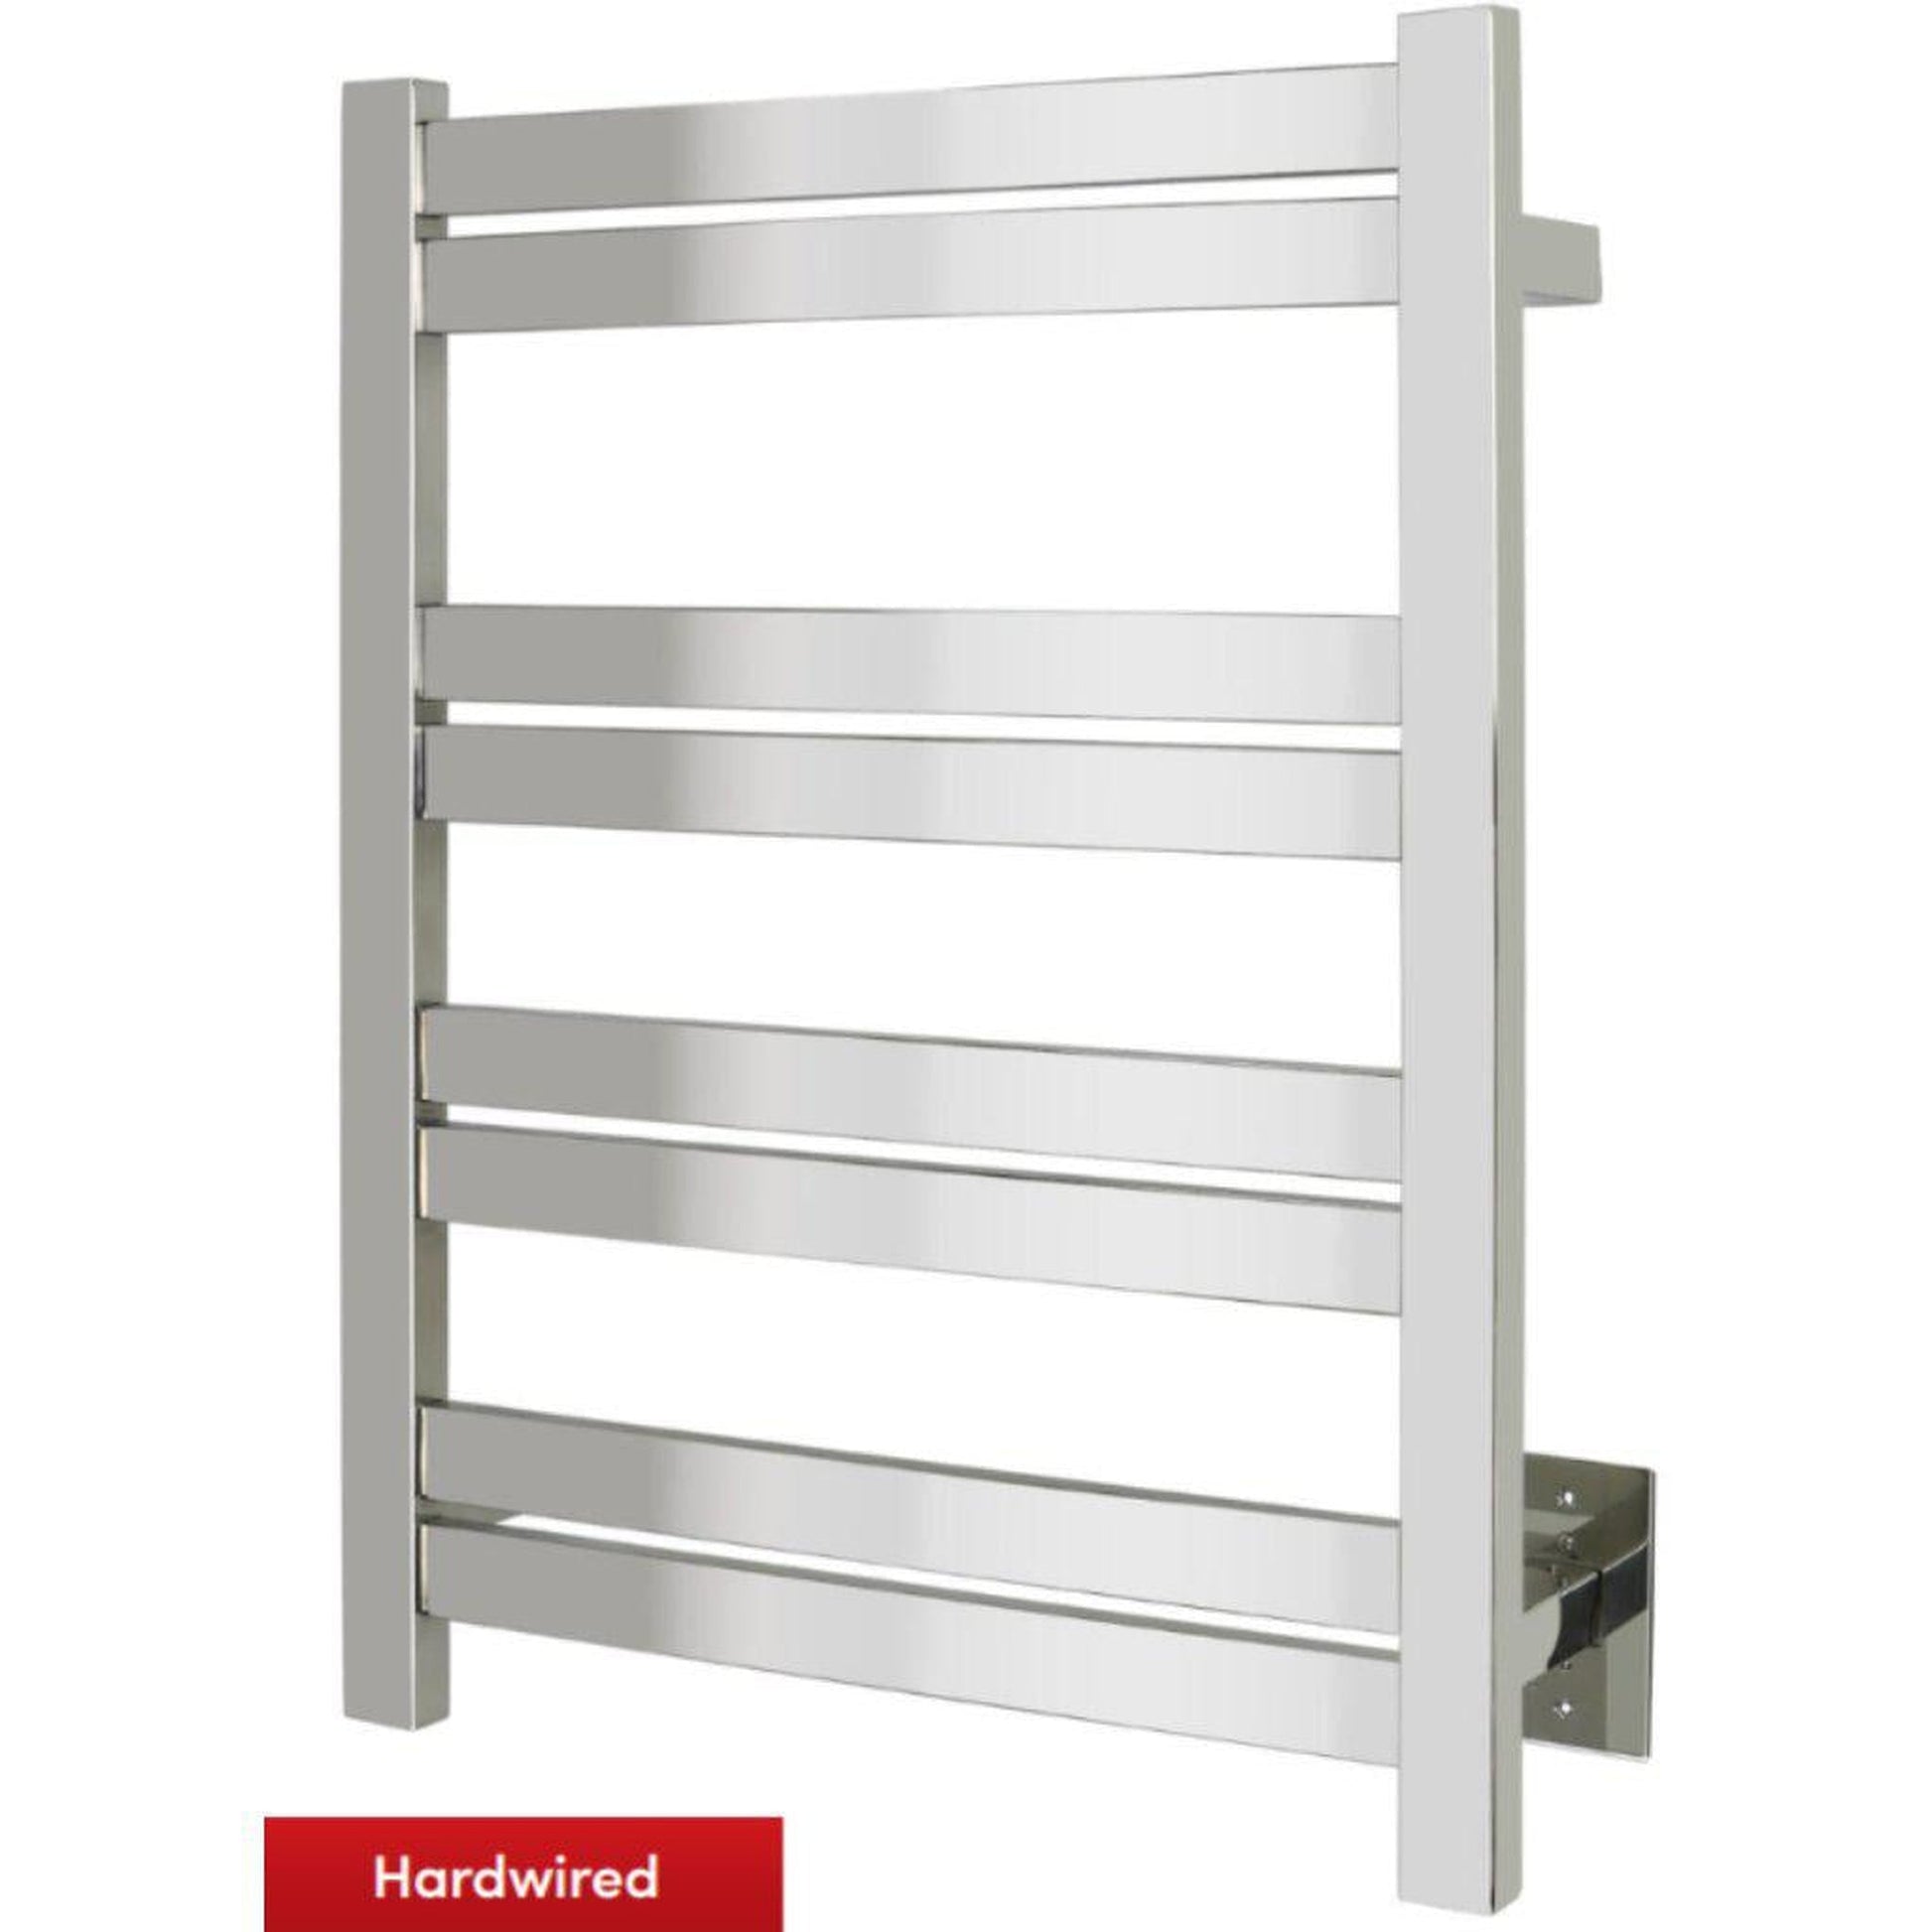 WarmlyYours Maple 8 20" x 28" Polished Stainless Steel Wall-Mounted 8-Bar Hardwired Towel Warmer